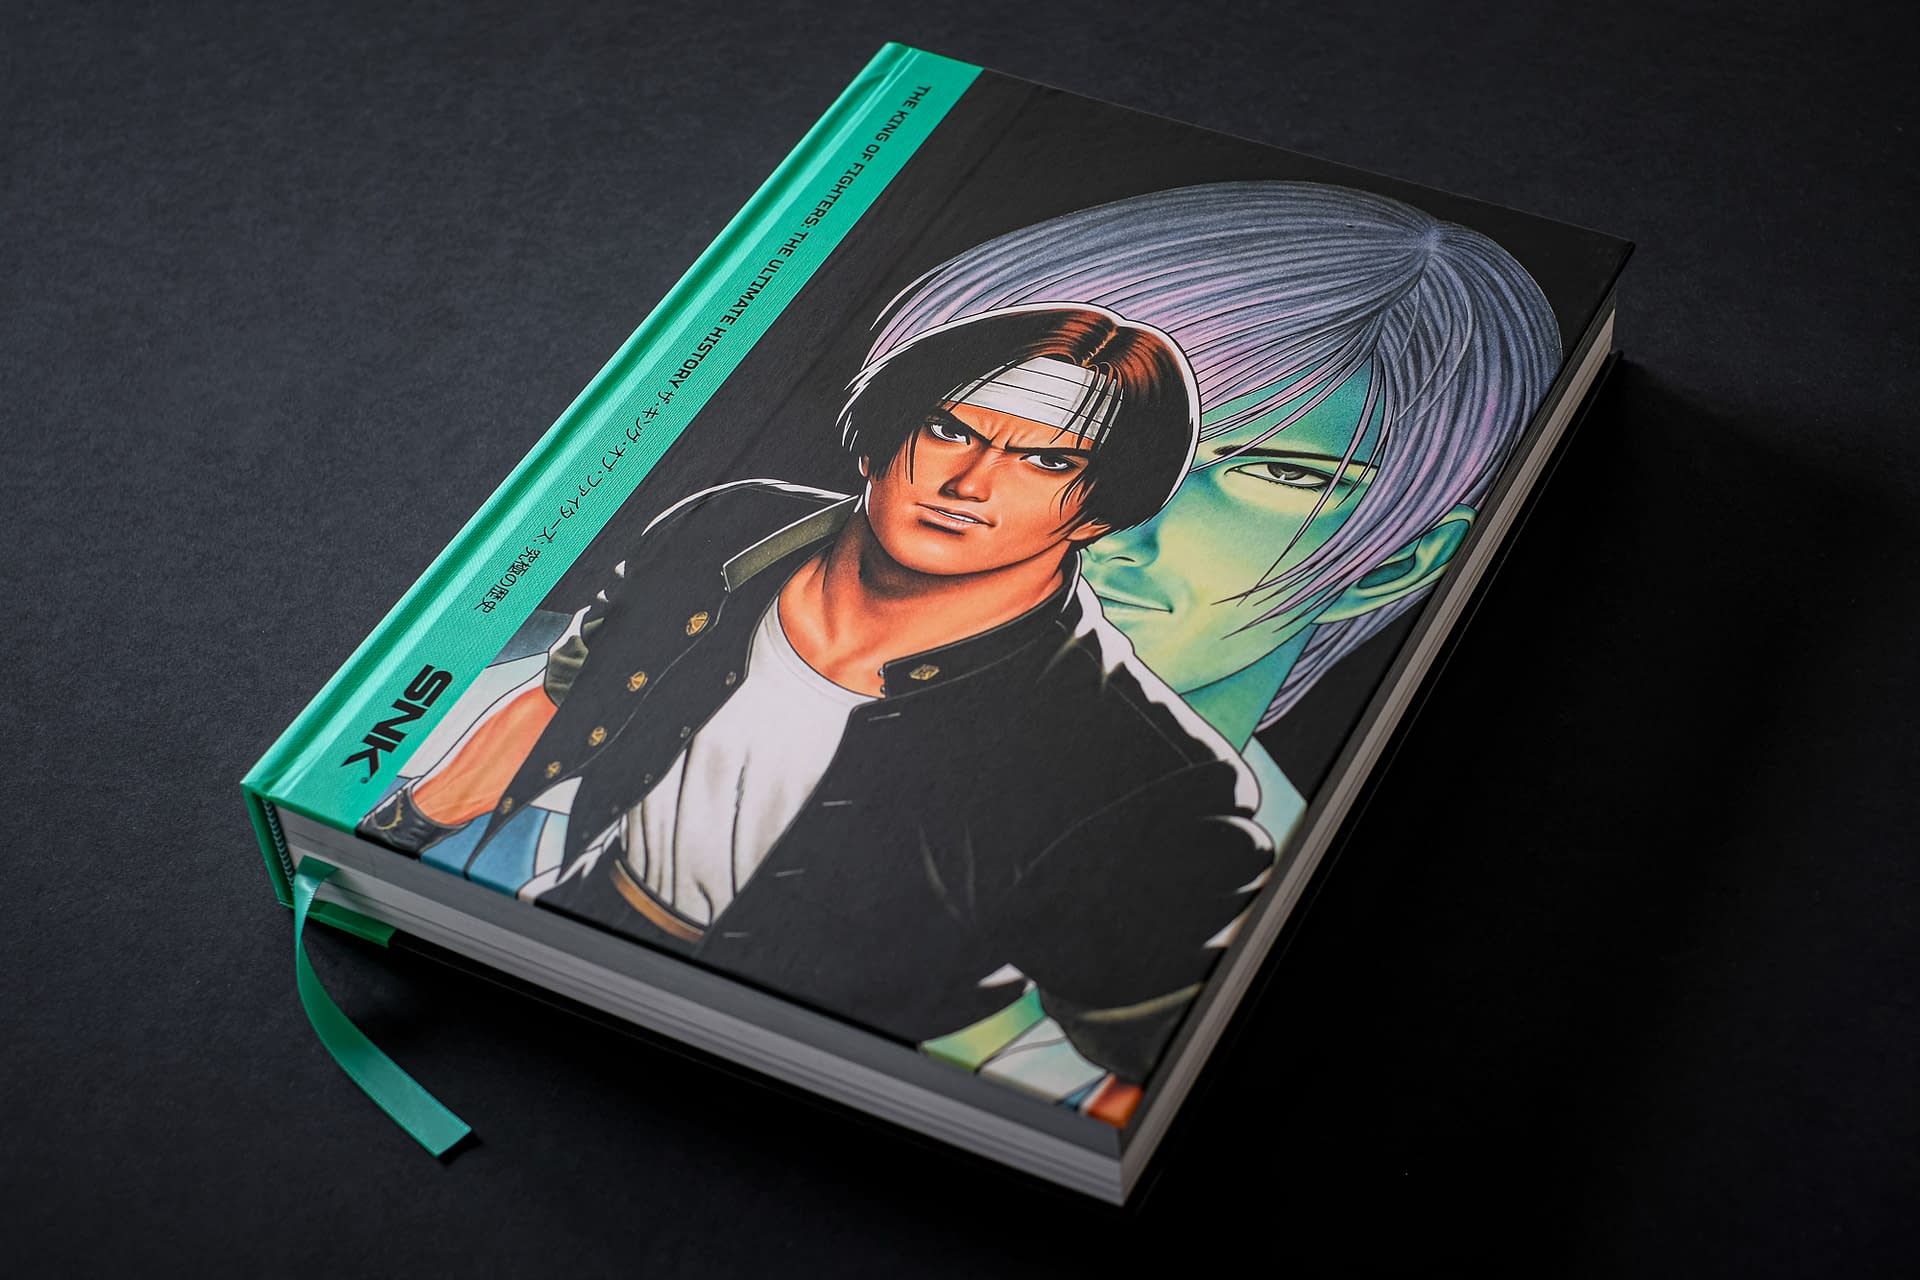 SNK Announces New Book - The King Of Fighters: The Ultimate History